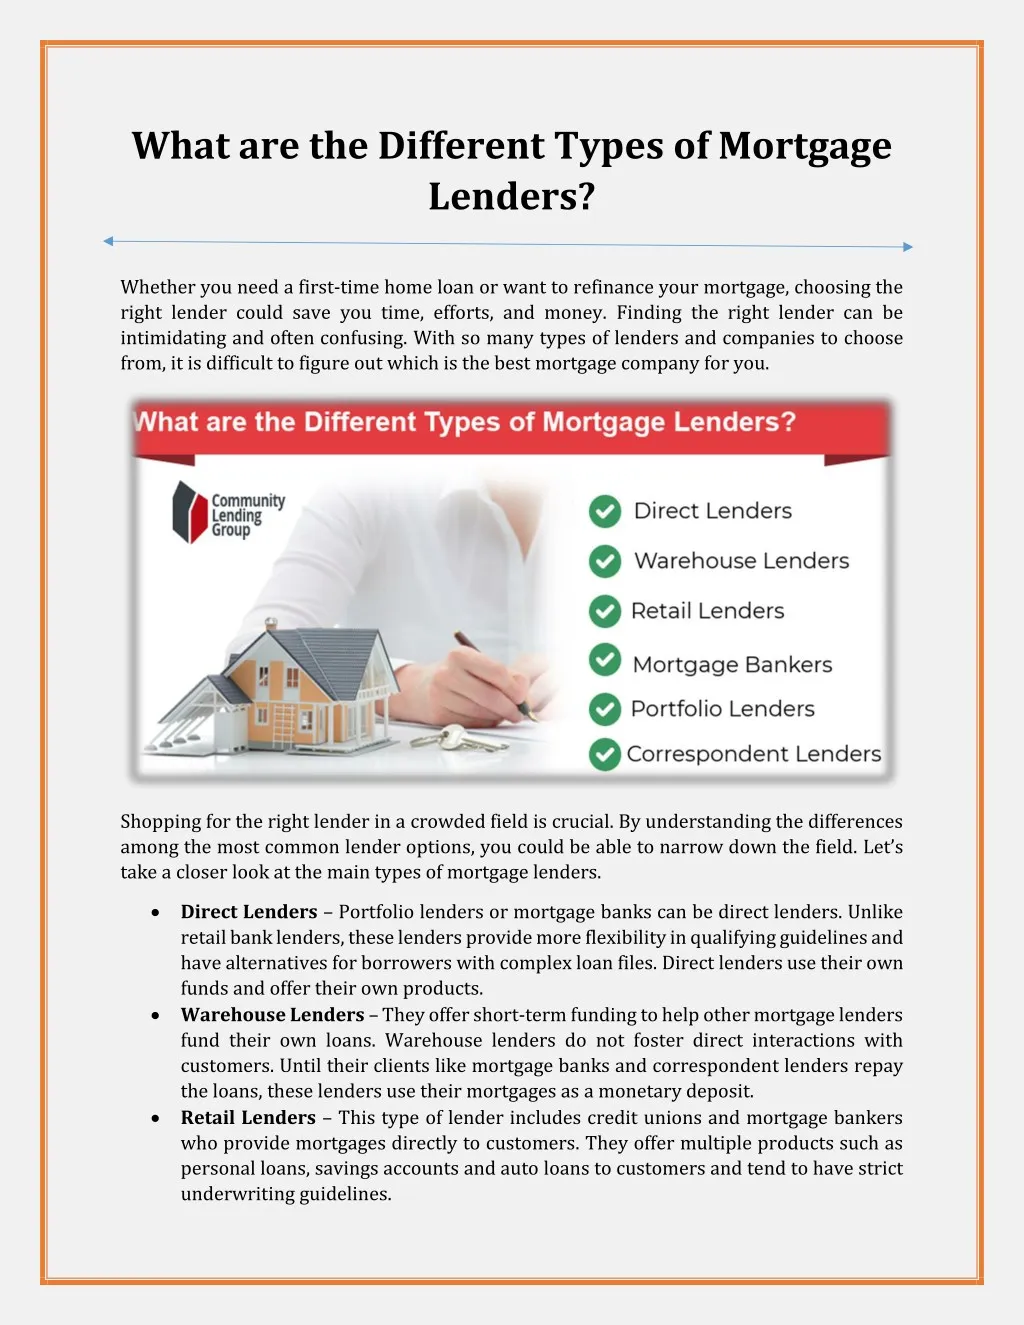 what are the different types of mortgage lenders